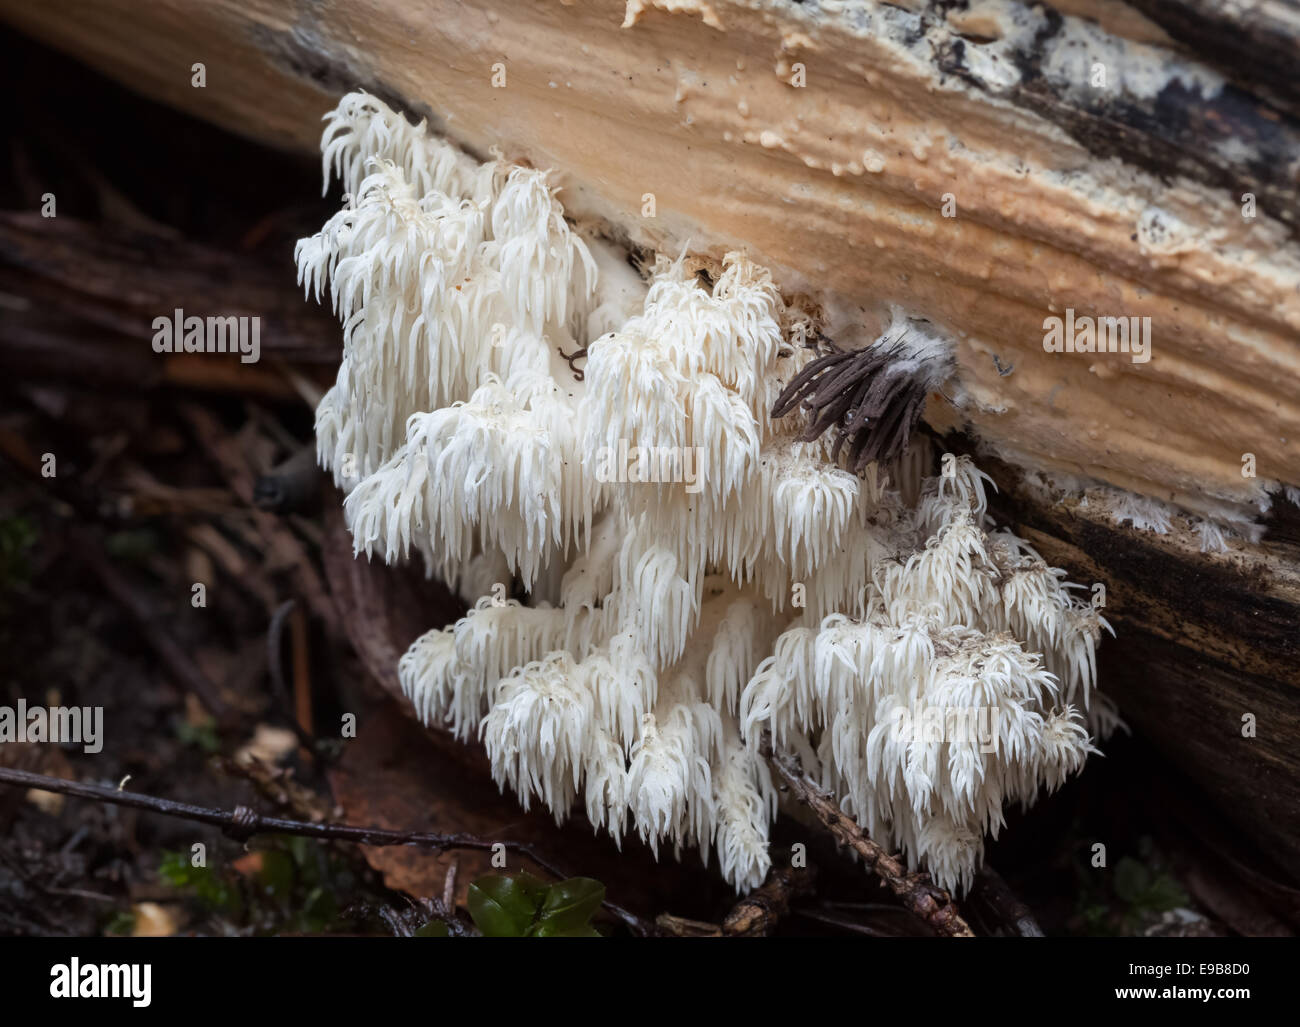 Coral tooth fungus, Hericium coralloides Stock Photo